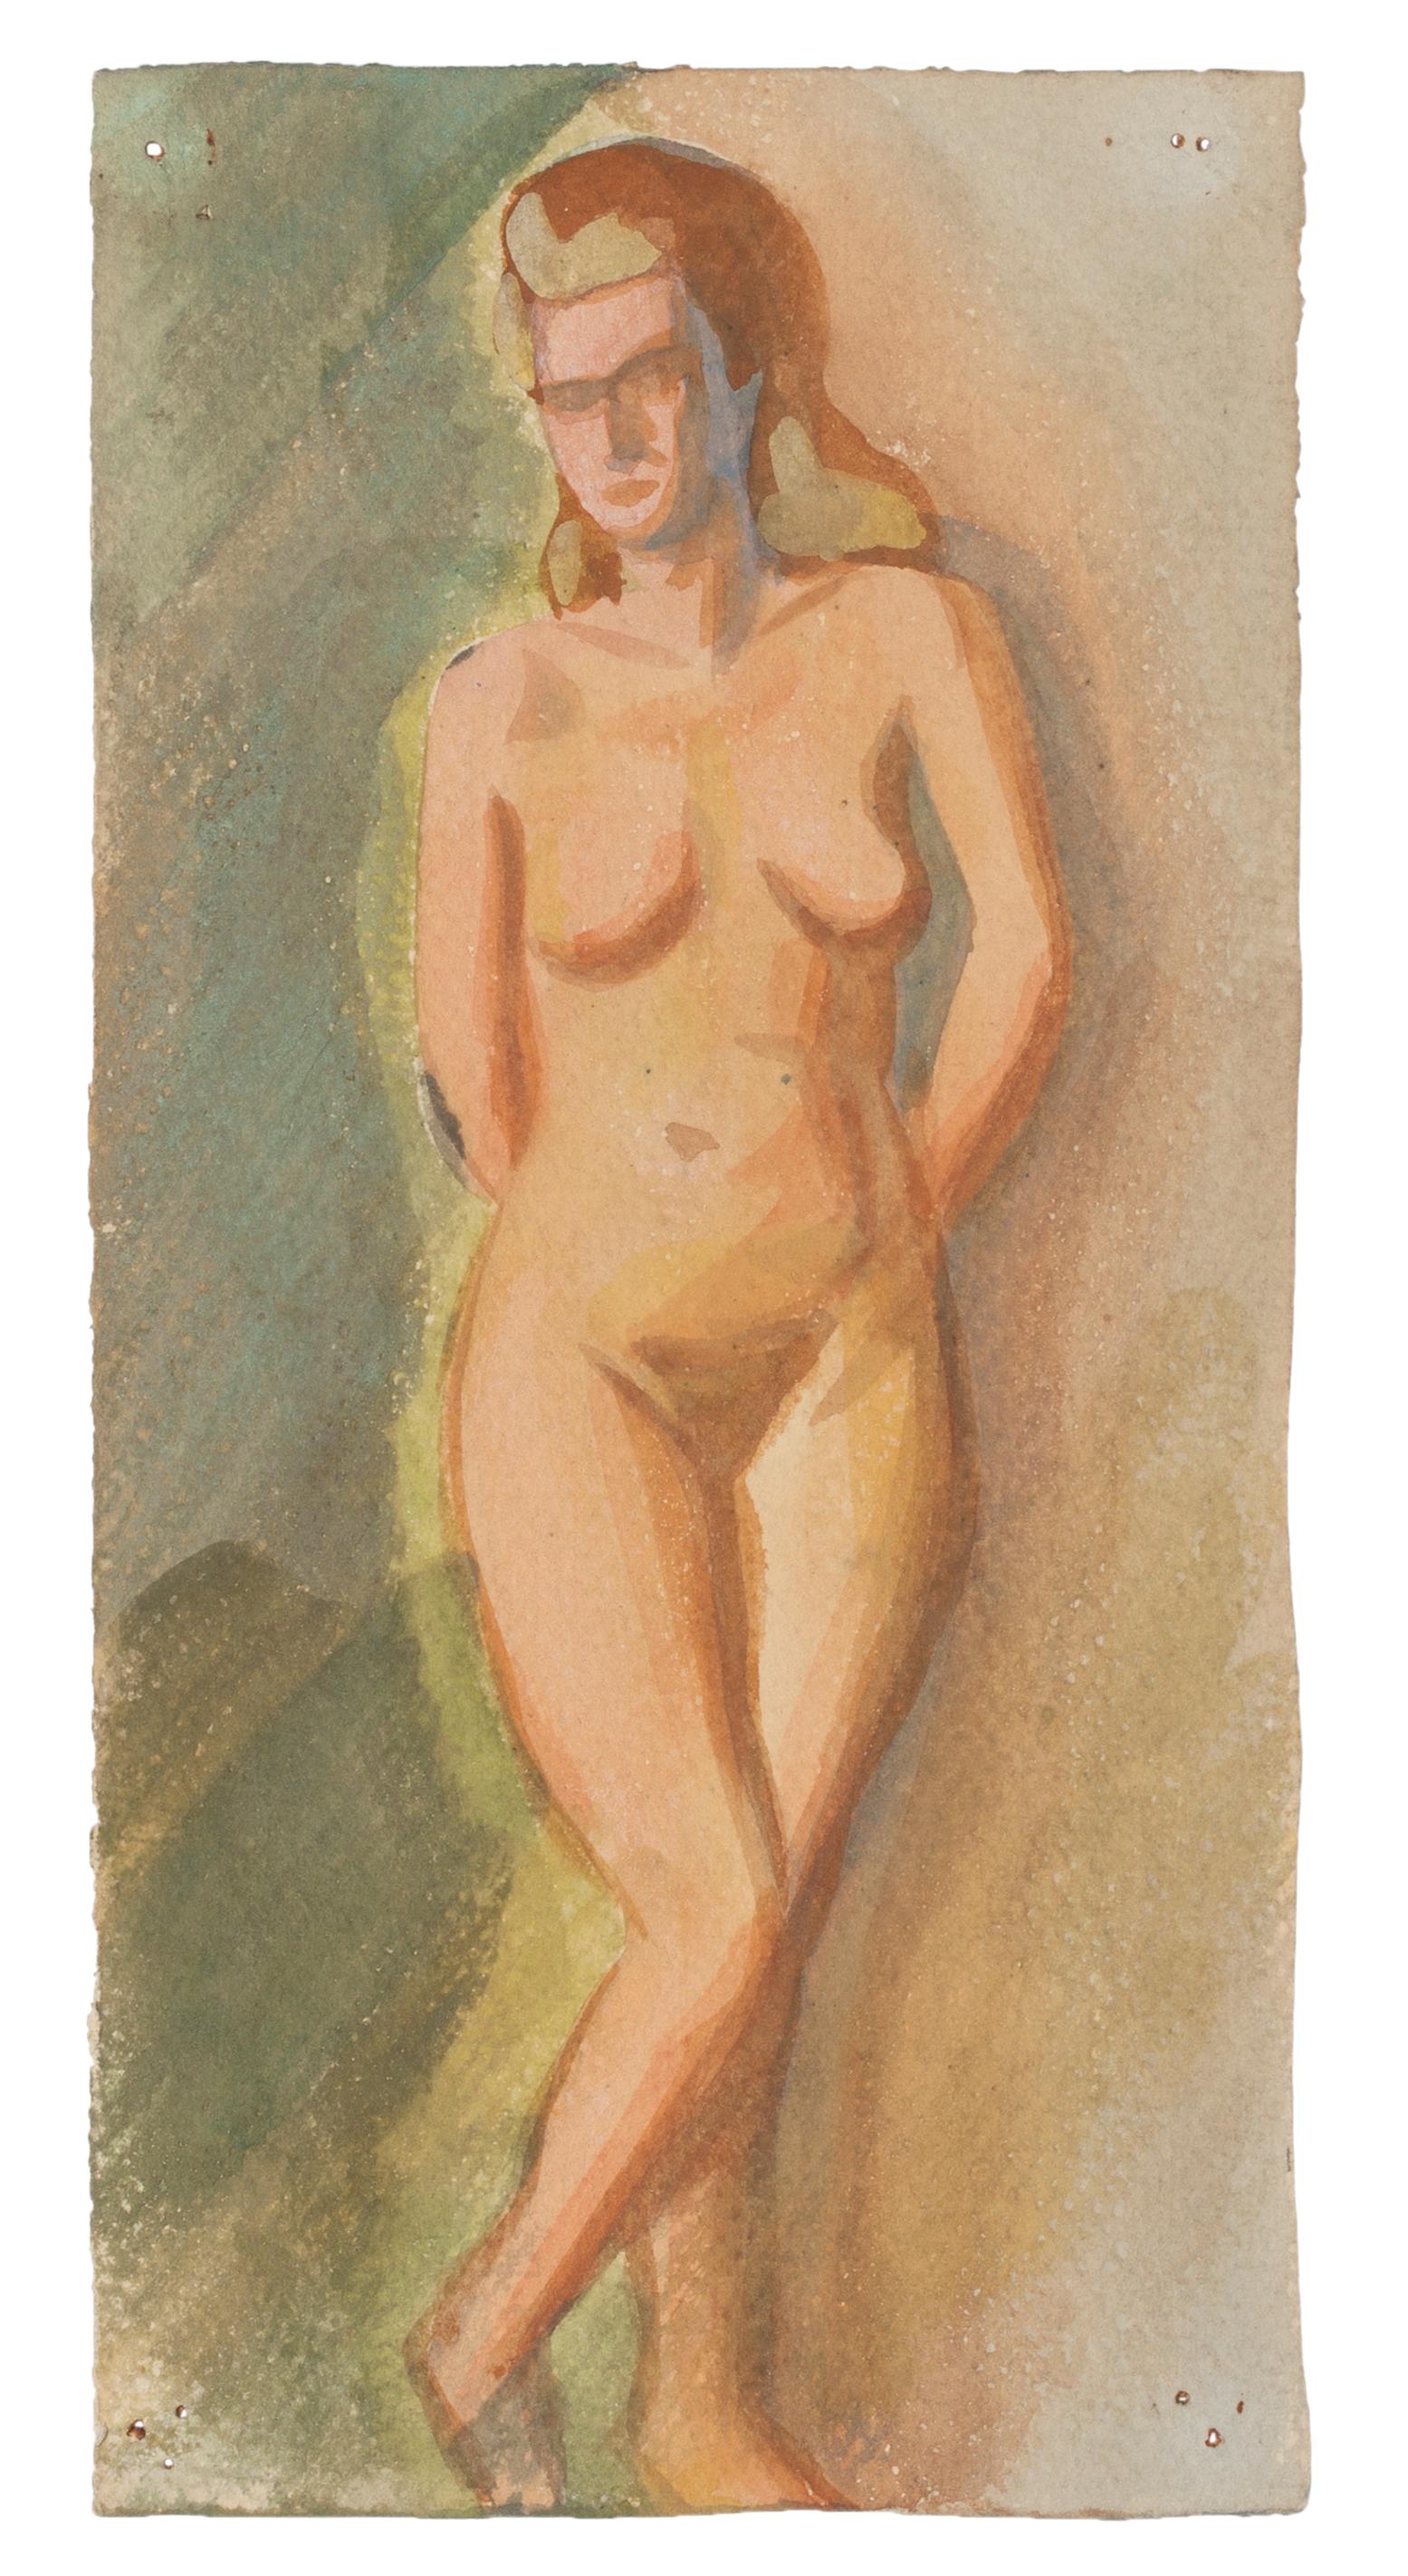 Nude 1940's is a drawing in watercolor a on paper, realized by Jean Delpech (1988-1916). 

Sheet dimension: 20.7 x 10 cm.

The artwork represents a nude woman standing with her hands behind, skillfully created, through delicate lines and vivid